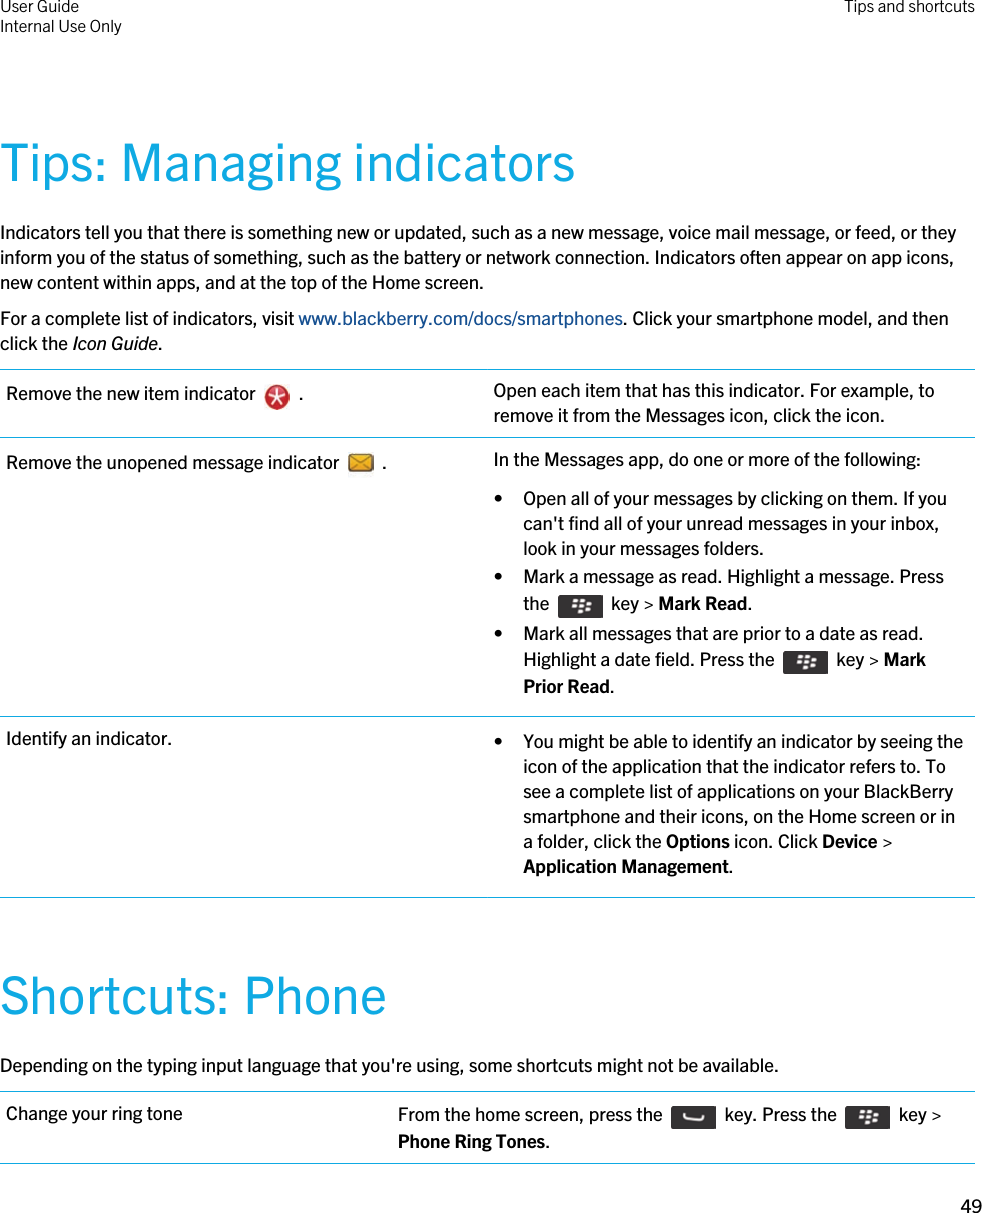 Tips: Managing indicatorsIndicators tell you that there is something new or updated, such as a new message, voice mail message, or feed, or they inform you of the status of something, such as the battery or network connection. Indicators often appear on app icons, new content within apps, and at the top of the Home screen.For a complete list of indicators, visit www.blackberry.com/docs/smartphones. Click your smartphone model, and then click the Icon Guide.Remove the new item indicator    . Open each item that has this indicator. For example, to remove it from the Messages icon, click the icon.Remove the unopened message indicator    . In the Messages app, do one or more of the following:• Open all of your messages by clicking on them. If you can&apos;t find all of your unread messages in your inbox, look in your messages folders.• Mark a message as read. Highlight a message. Press the    key &gt; Mark Read.• Mark all messages that are prior to a date as read. Highlight a date field. Press the    key &gt; Mark Prior Read.Identify an indicator. • You might be able to identify an indicator by seeing the icon of the application that the indicator refers to. To see a complete list of applications on your BlackBerry smartphone and their icons, on the Home screen or in a folder, click the Options icon. Click Device &gt; Application Management.Shortcuts: PhoneDepending on the typing input language that you&apos;re using, some shortcuts might not be available.Change your ring tone From the home screen, press the    key. Press the    key &gt; Phone Ring Tones.User GuideInternal Use Only Tips and shortcuts49 